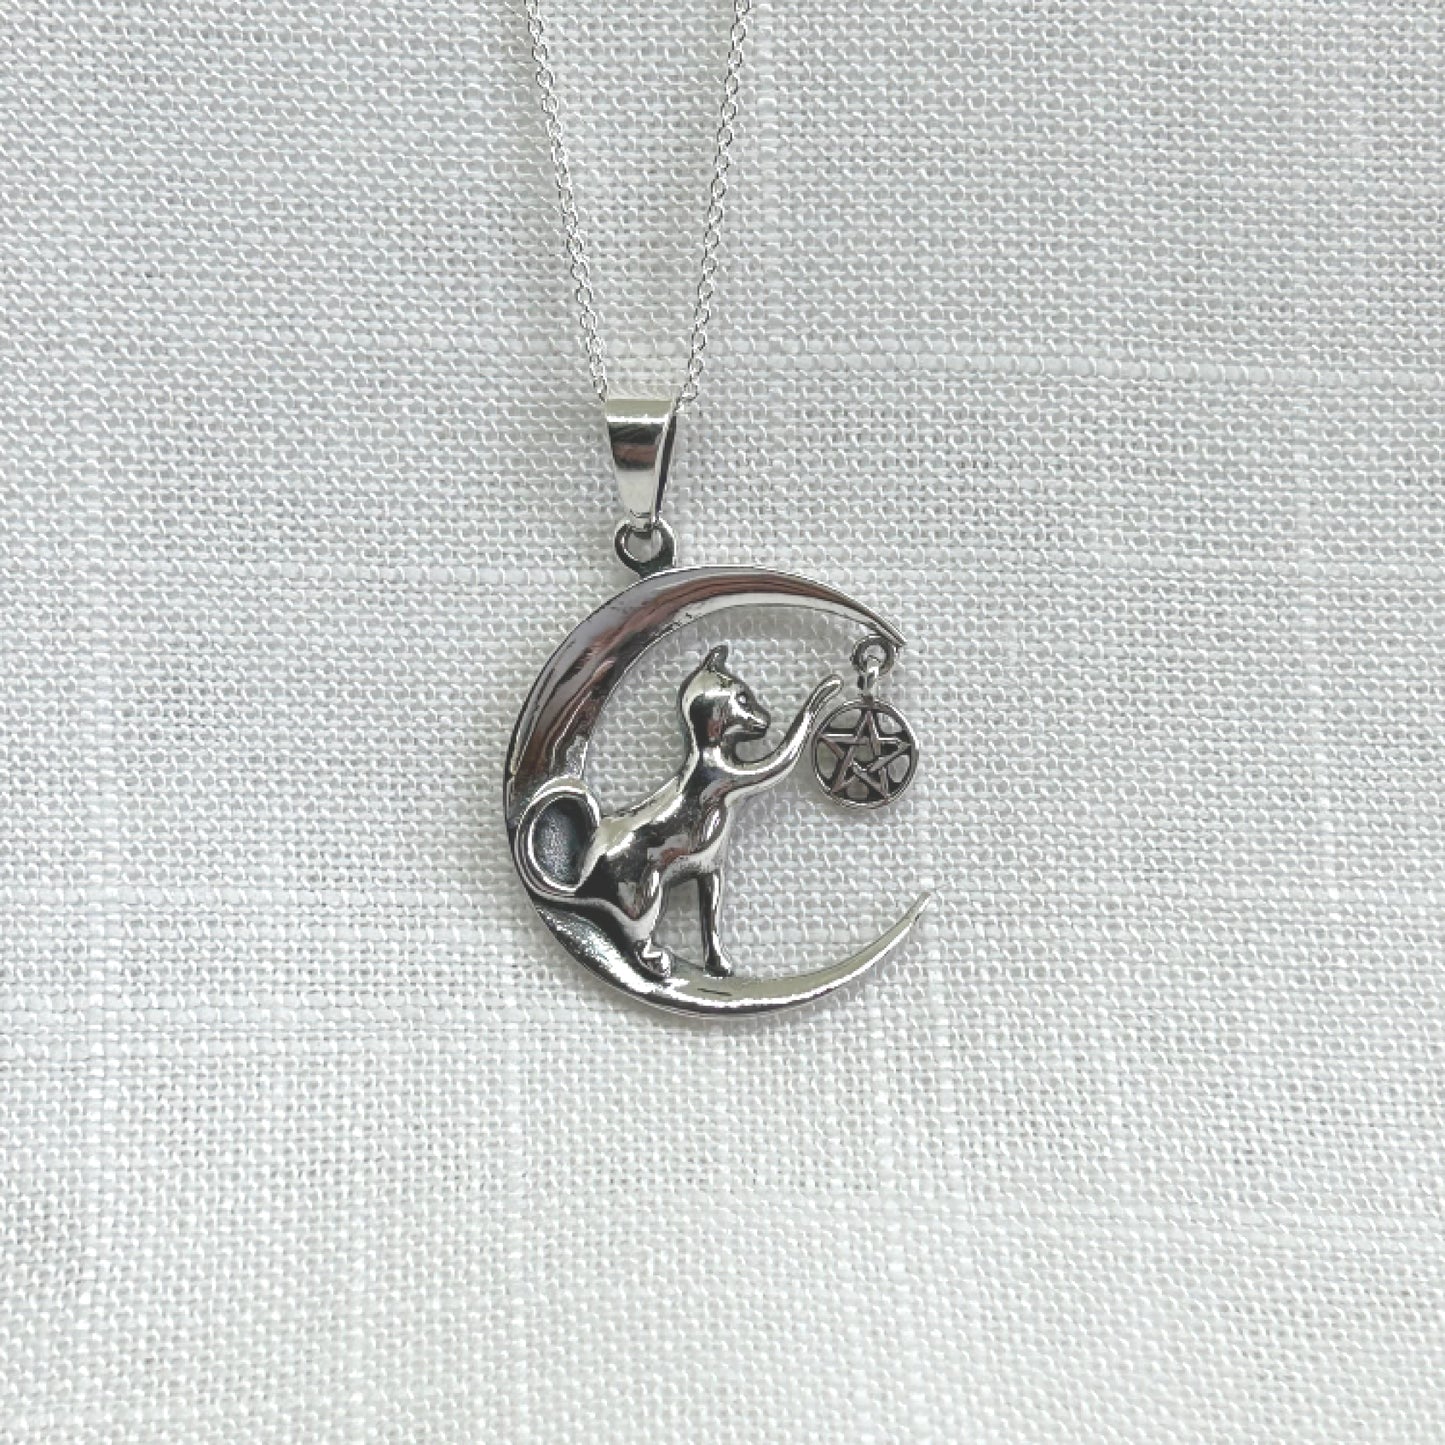 This 925 silver necklace features a cat nestled in a crescent moon, playfully tapping a hanging pentacle and causing it to sway. The pendant measures 3.8cm in height, including the bale by 2.5cm in width. The necklace comes complete with a 20 inch 925 silver chain and is delivered in a tarnish proof bag inside a gift box.